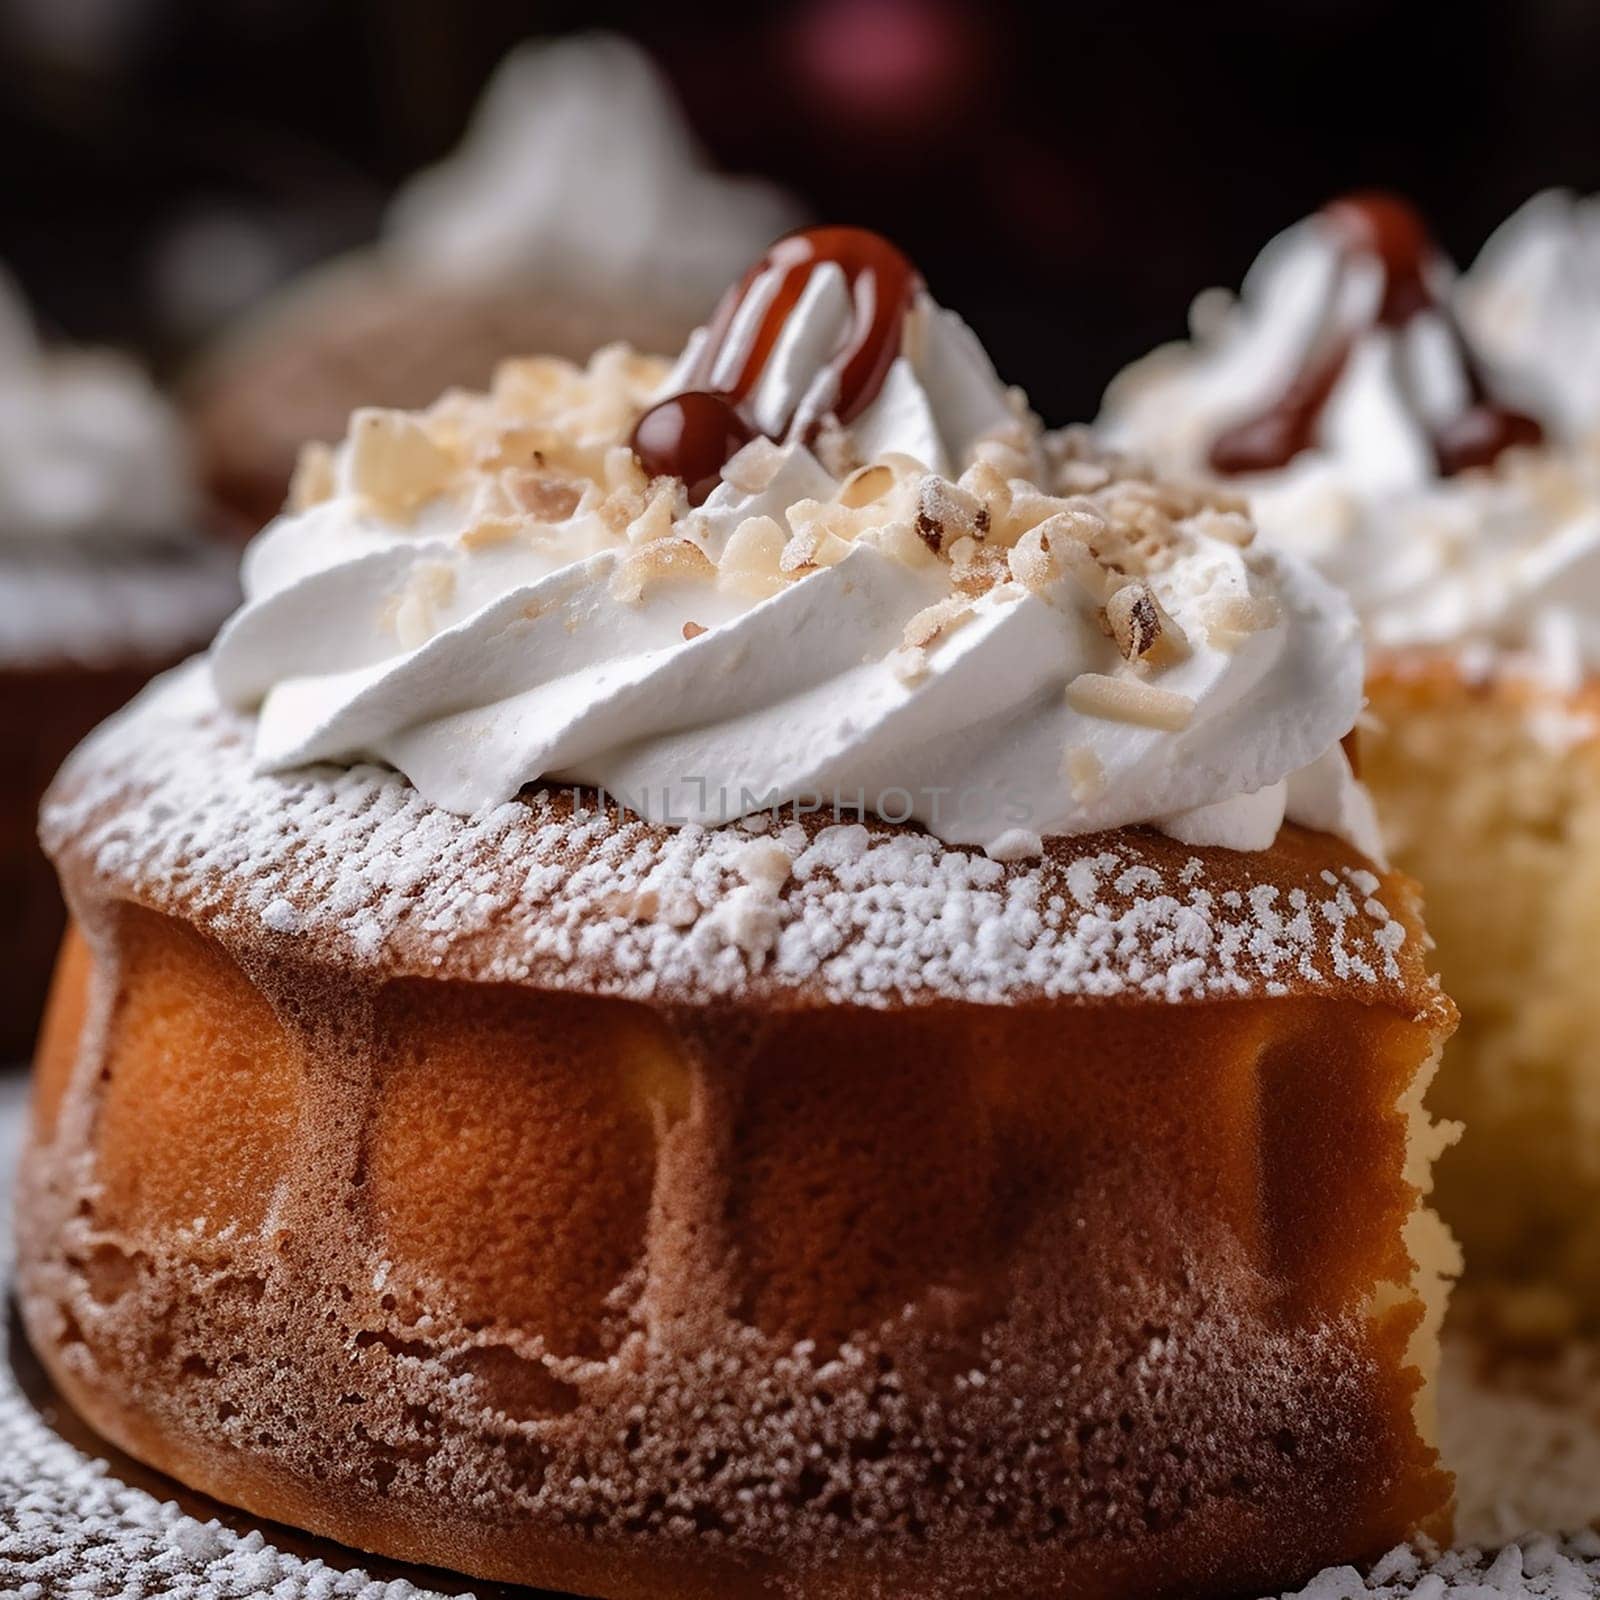 Delicious fluffy cake topped with whipped cream, drizzle, and powdered sugar.